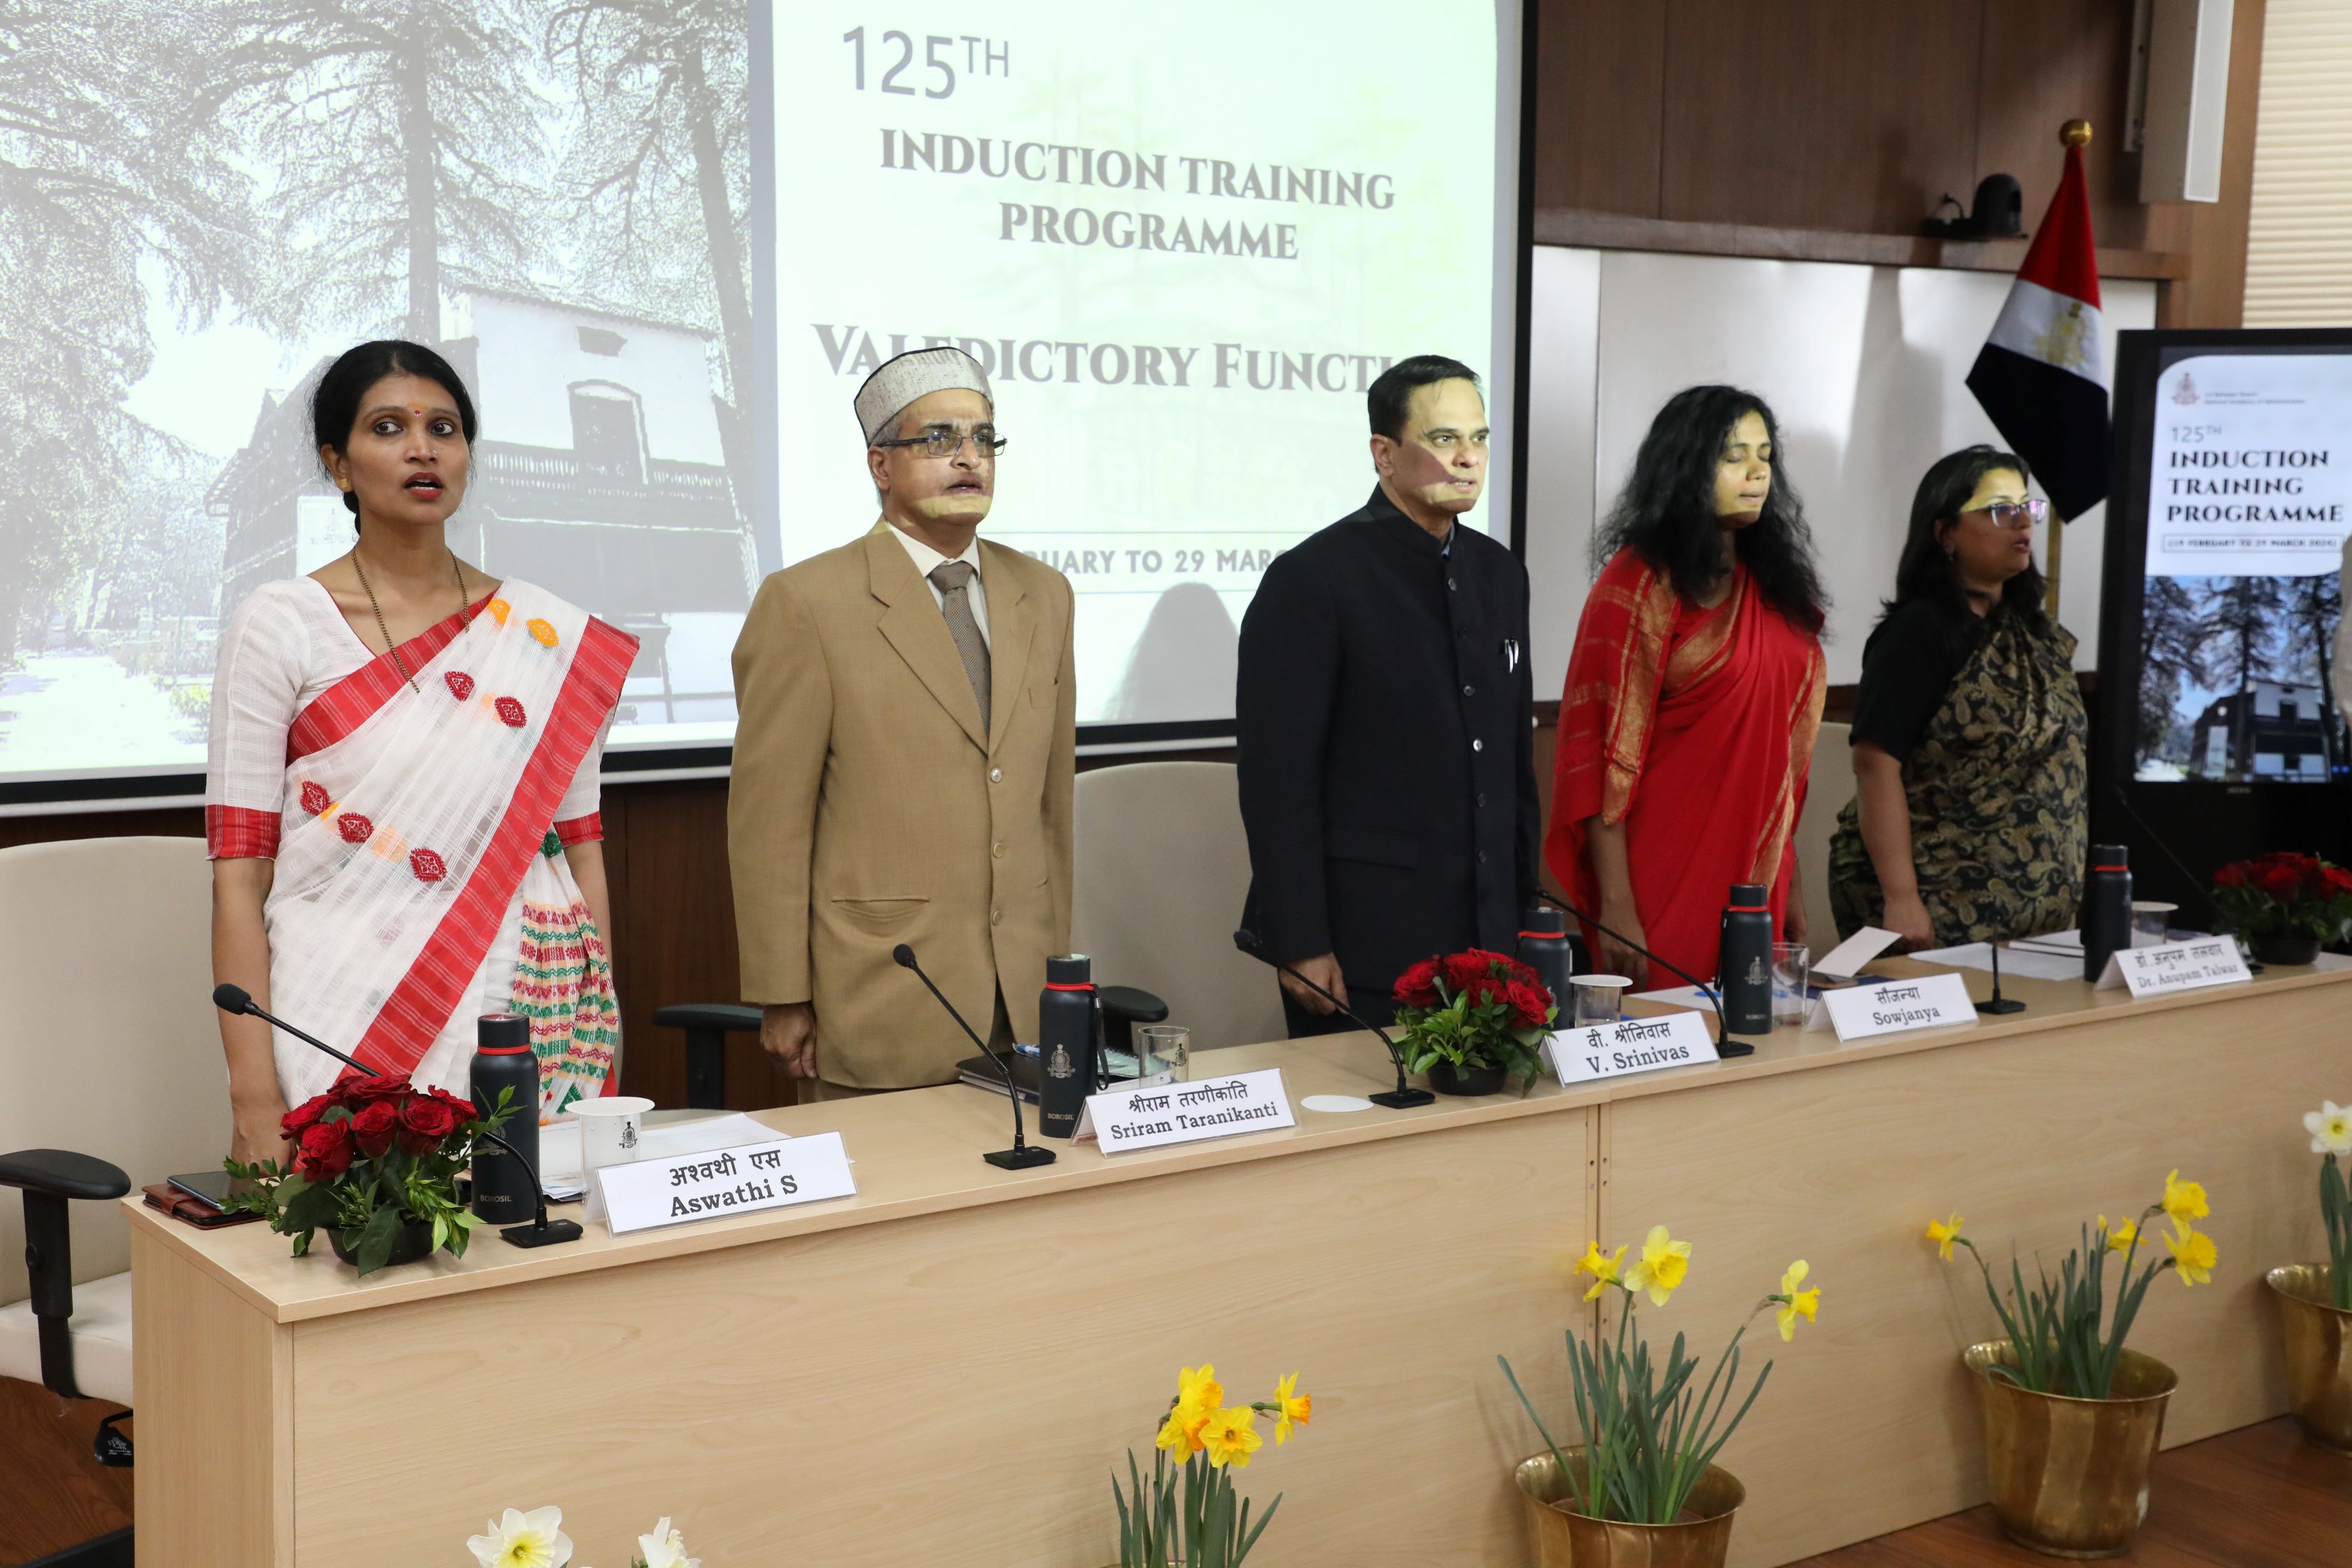 Valedictory Function of 125th Induction Training Programme